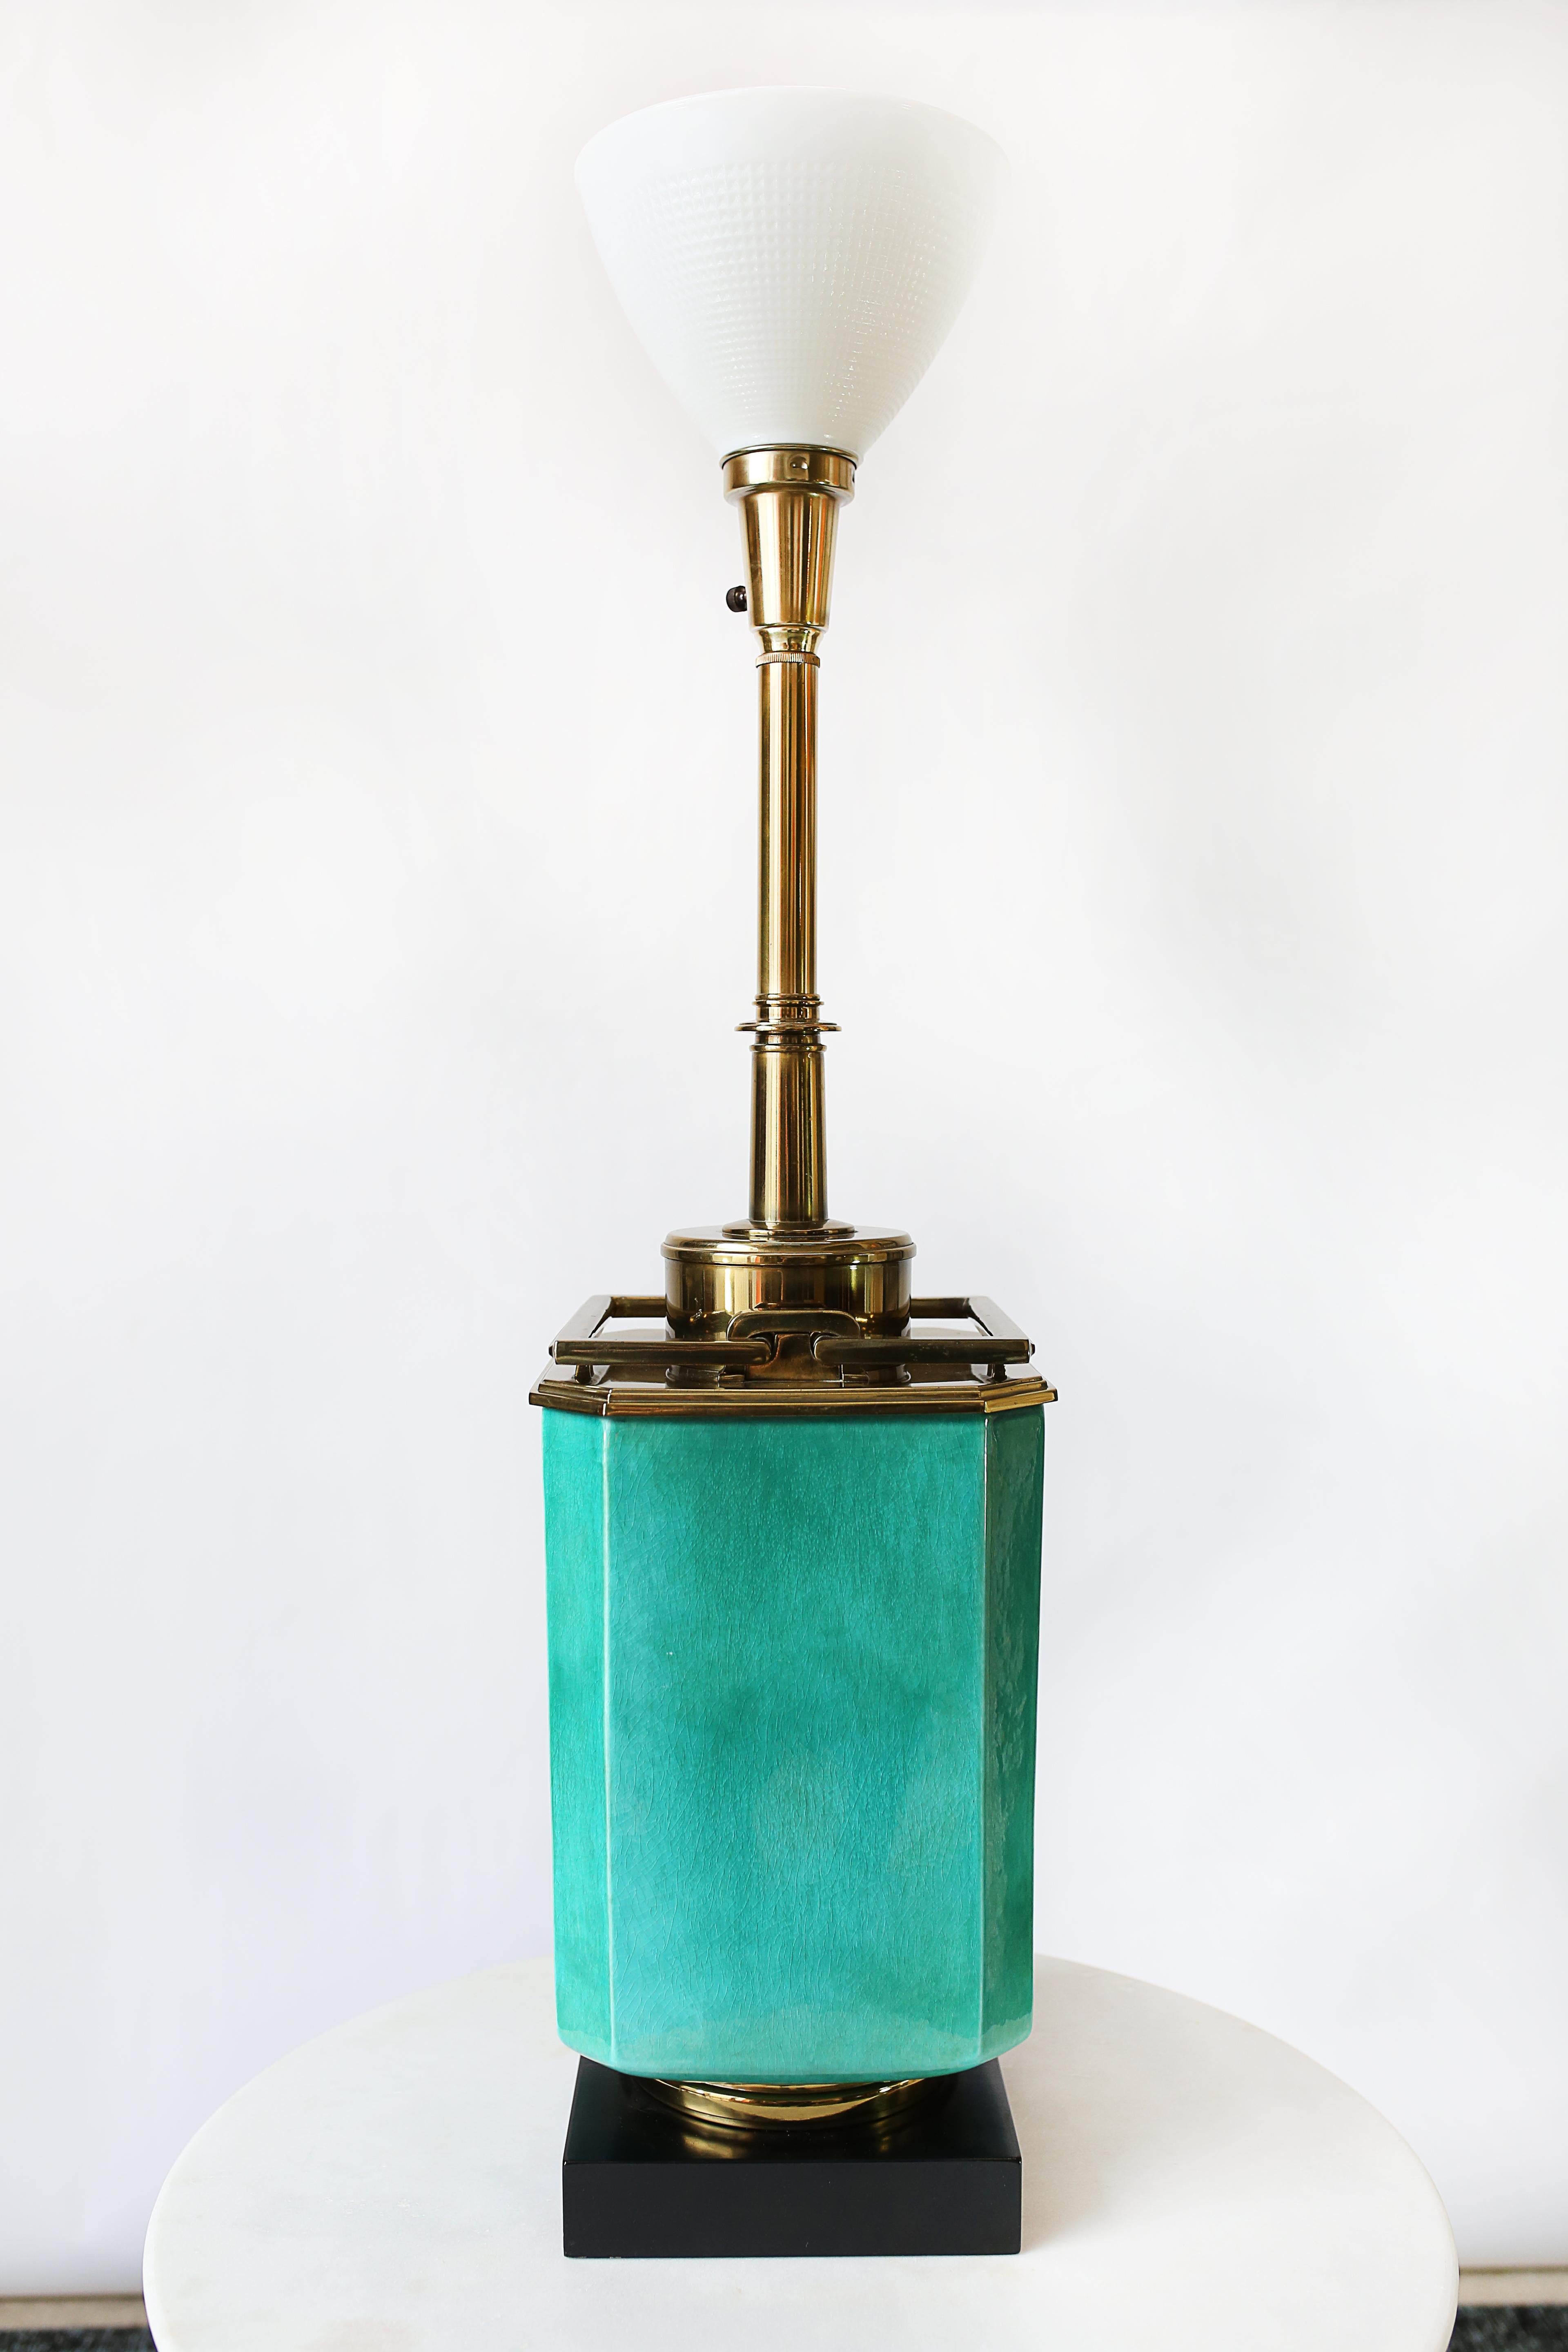 North American Vintage 1950s Large Turquoise and Brass Table Lamp by Edwin Cole for Stiffel